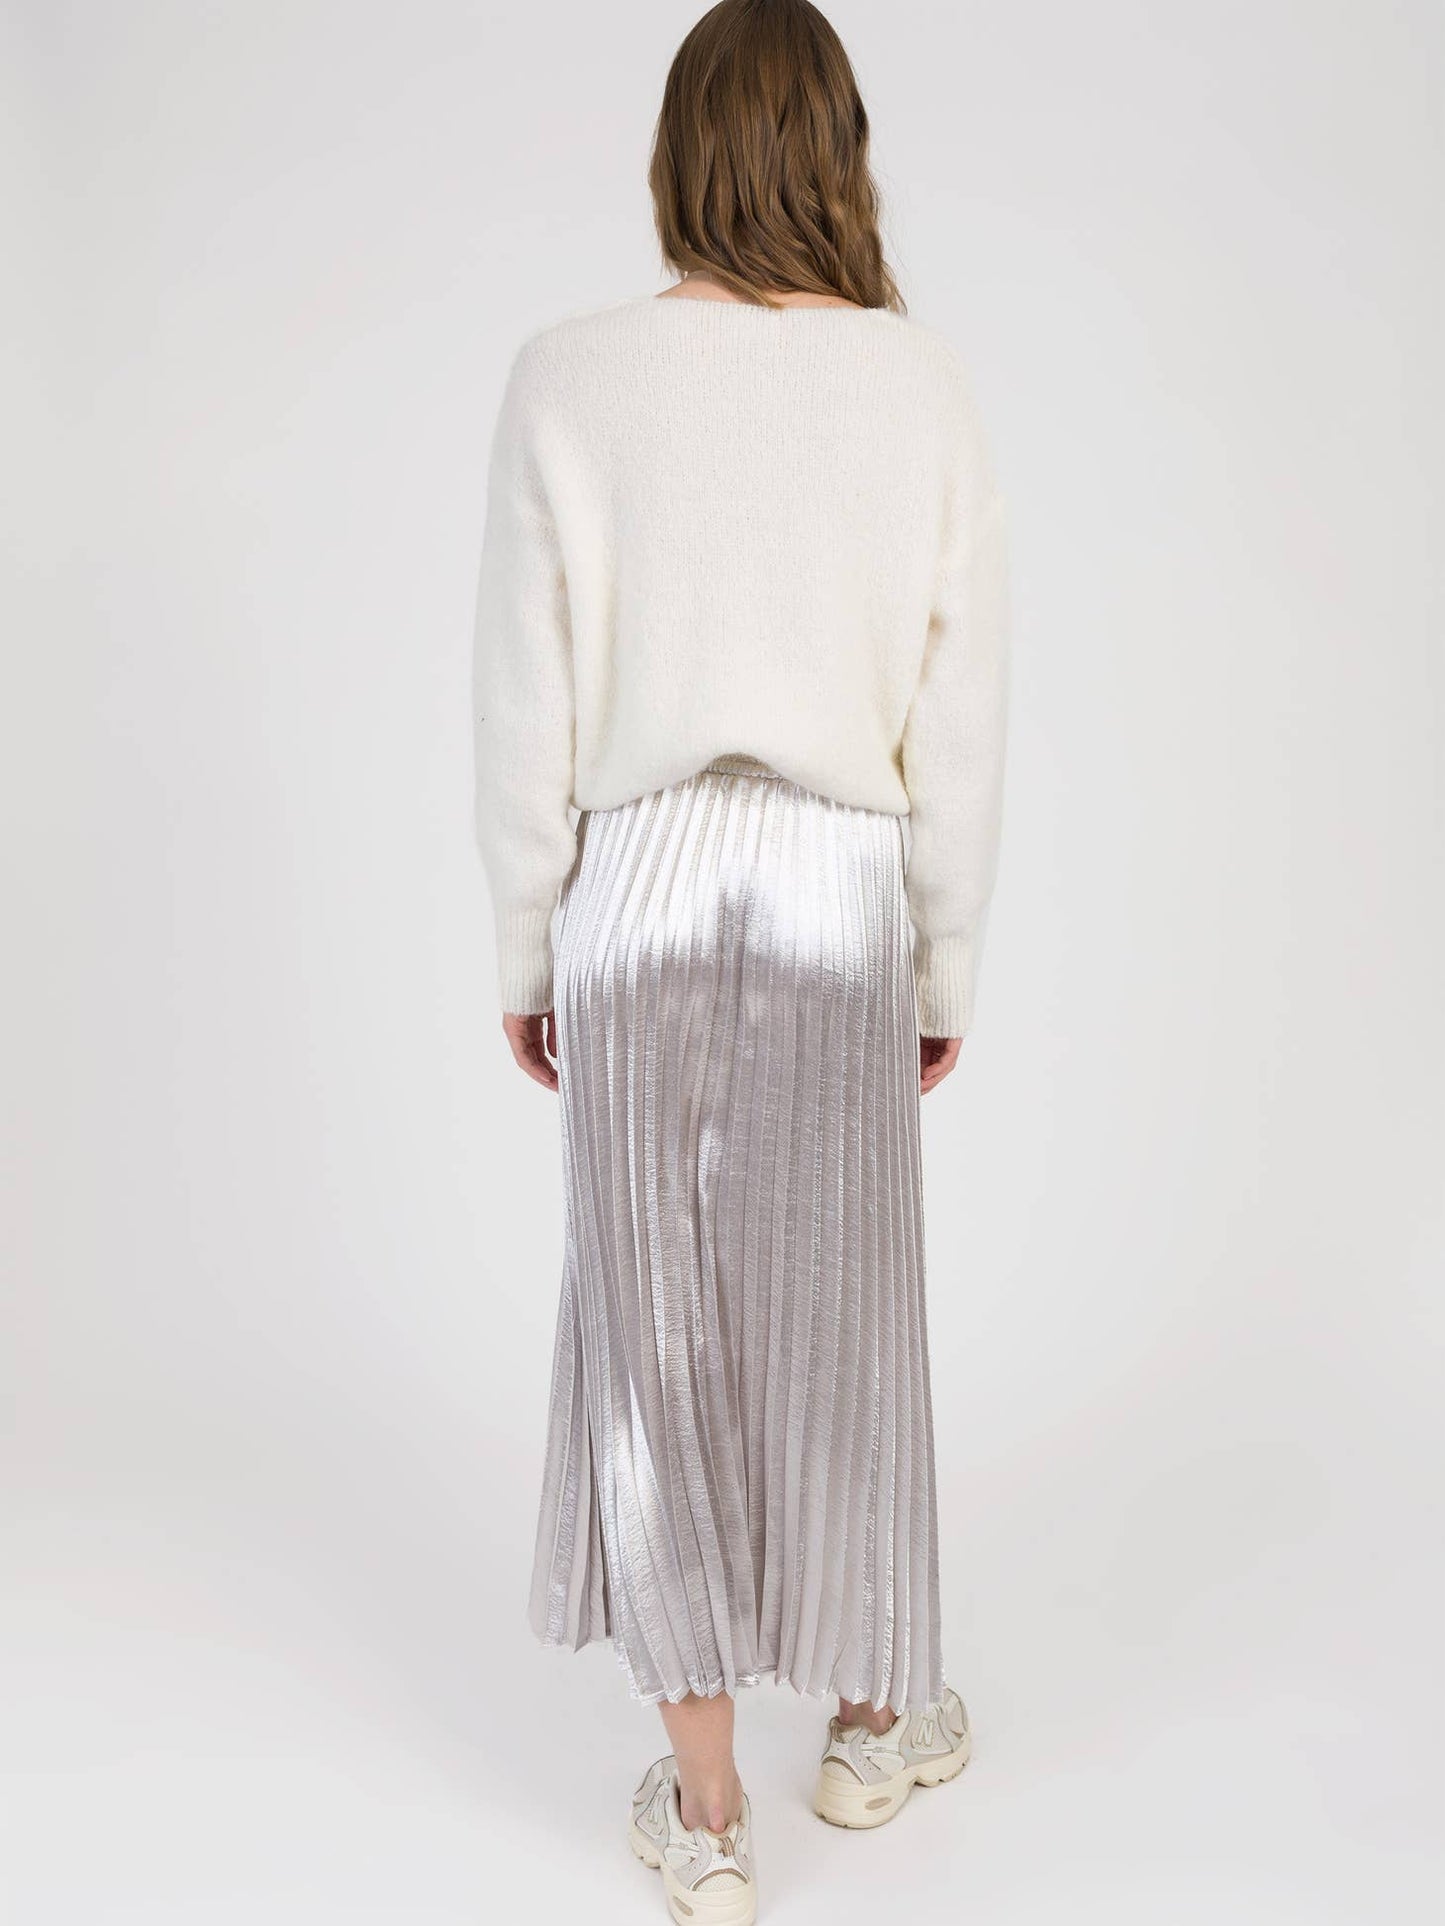 Ange Silver Pleated Skirt